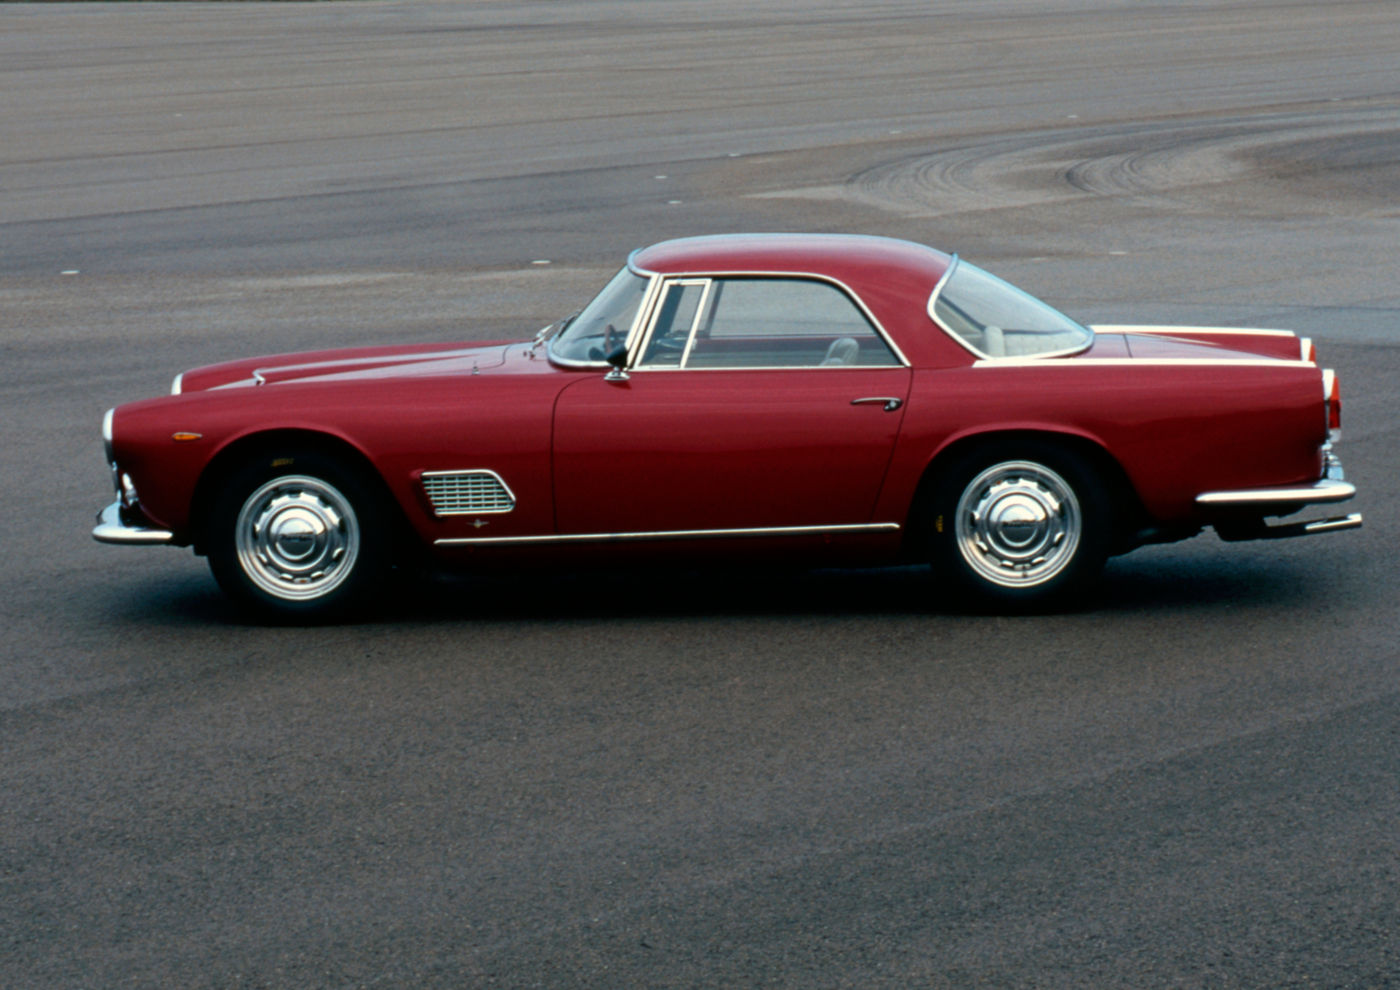 1957 Maserati 3500GT - side view of a classic car model in red